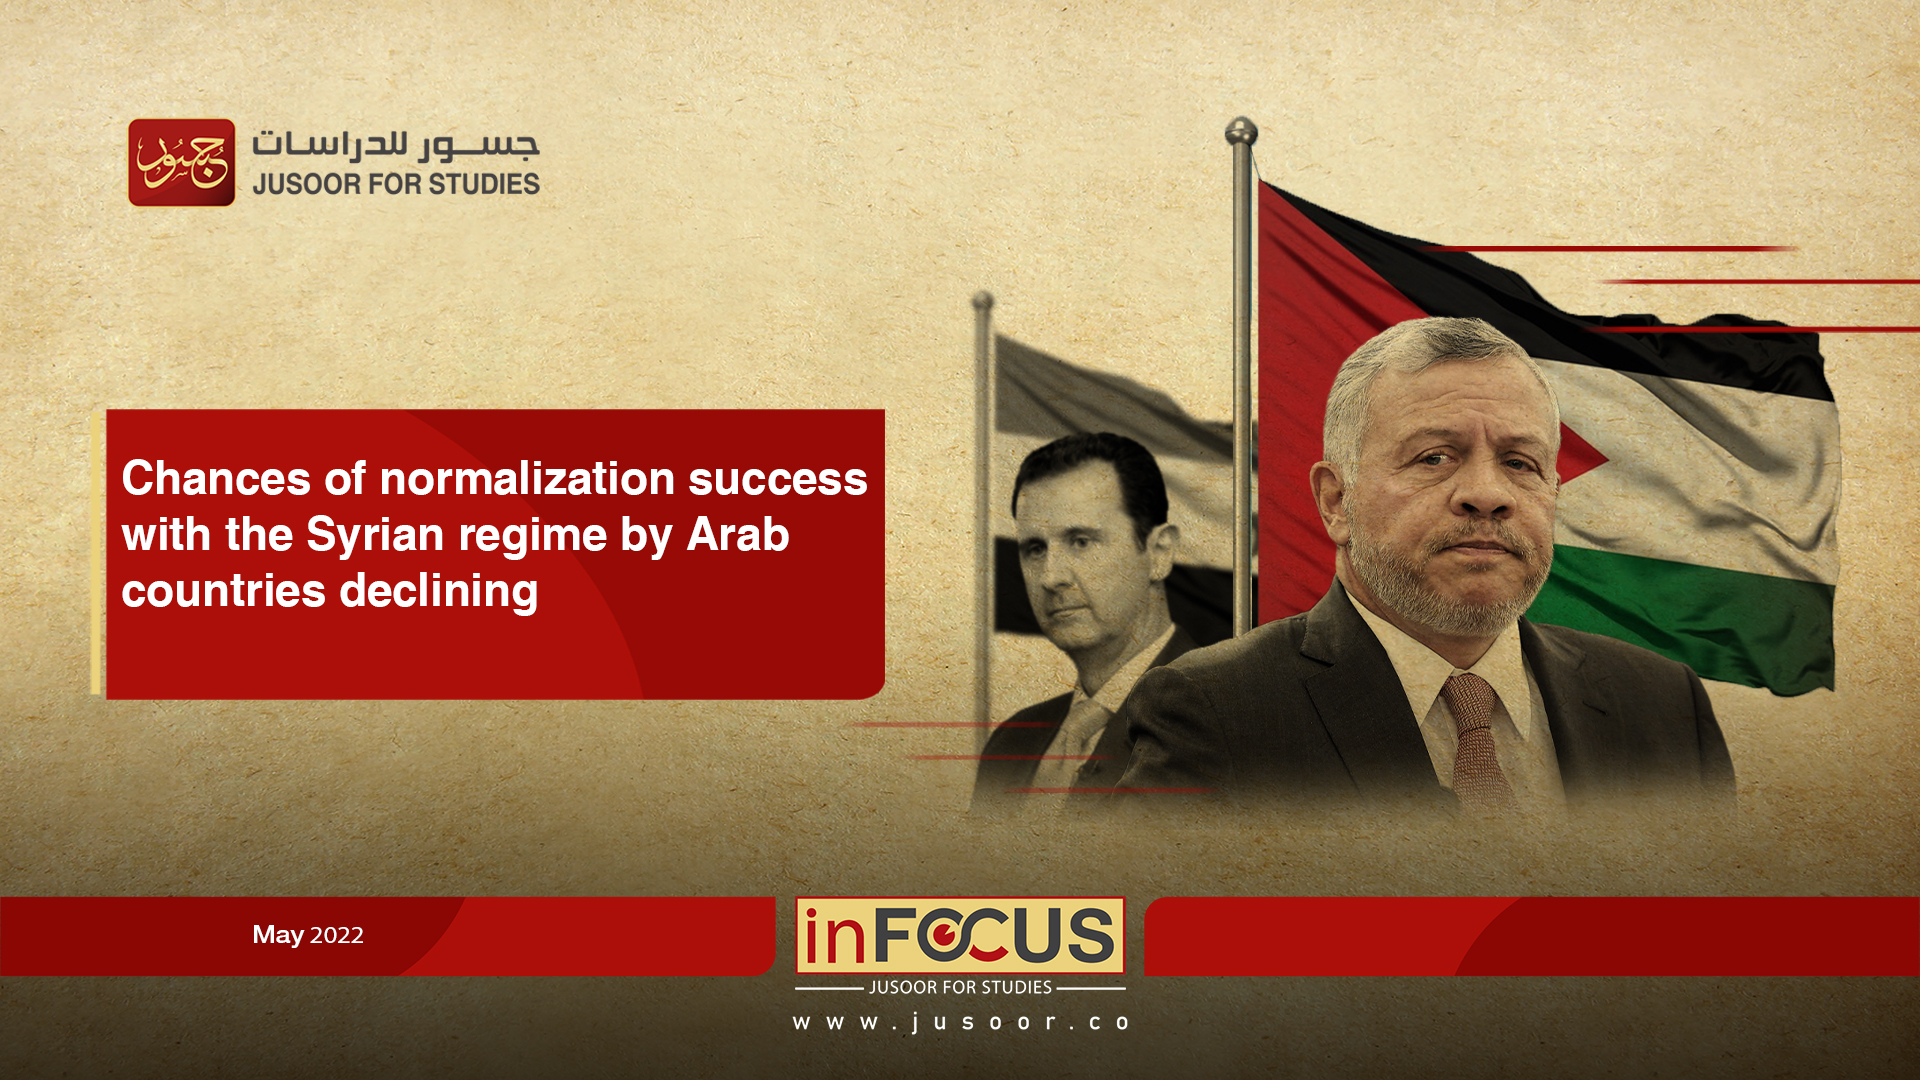 Chances of normalization success with the Syrian regime by Arab countries declining